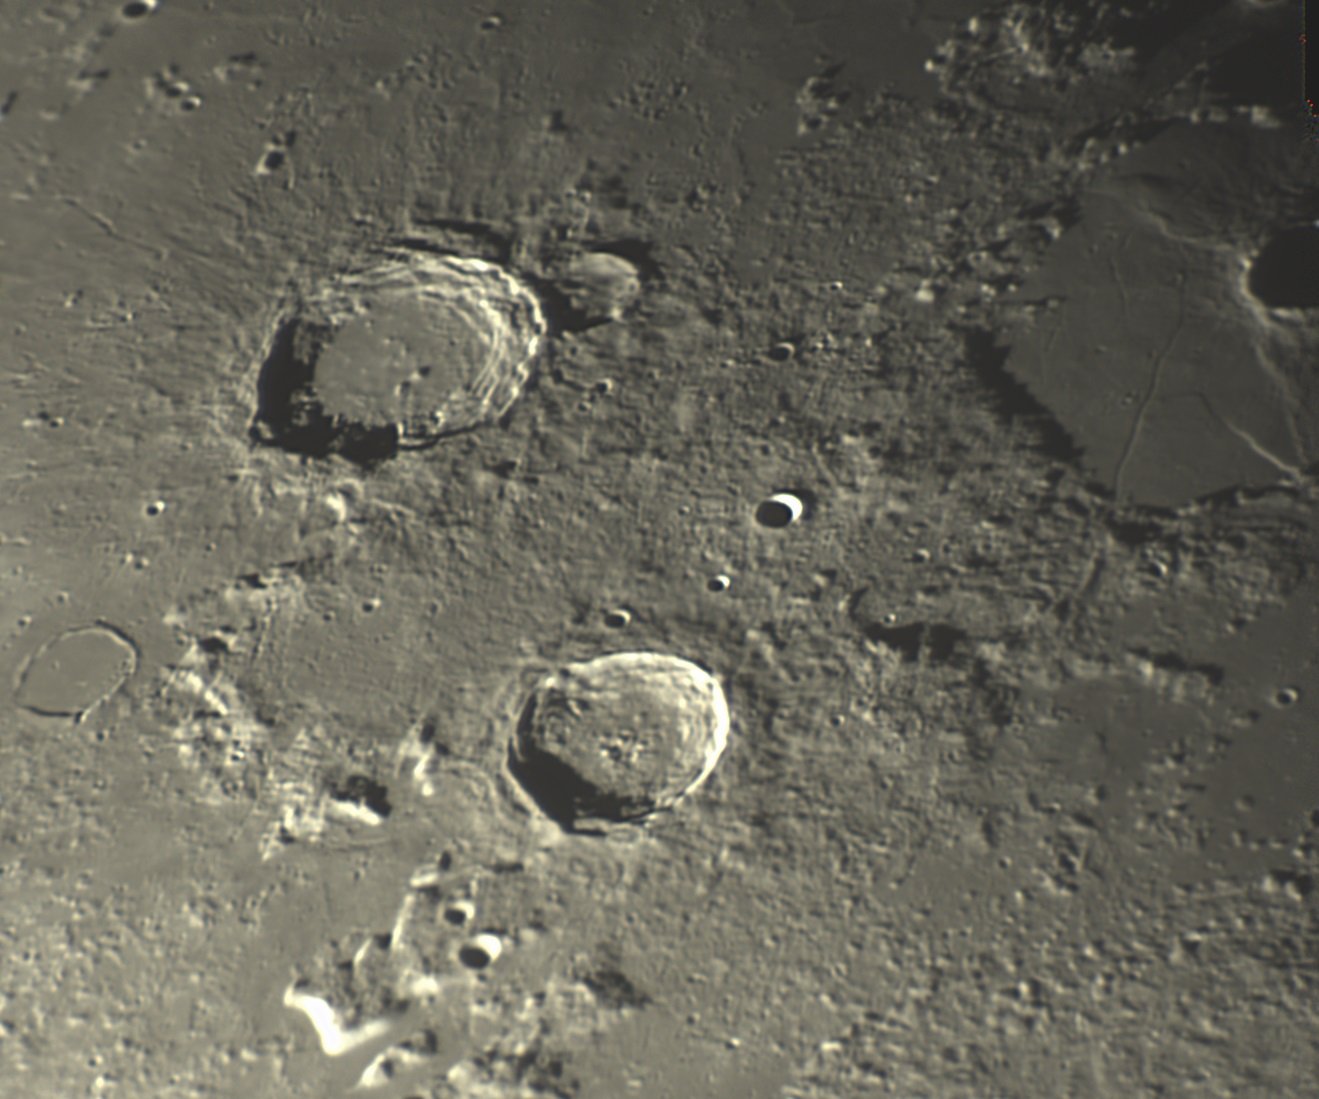 Aristoteles and Eudoxus craters